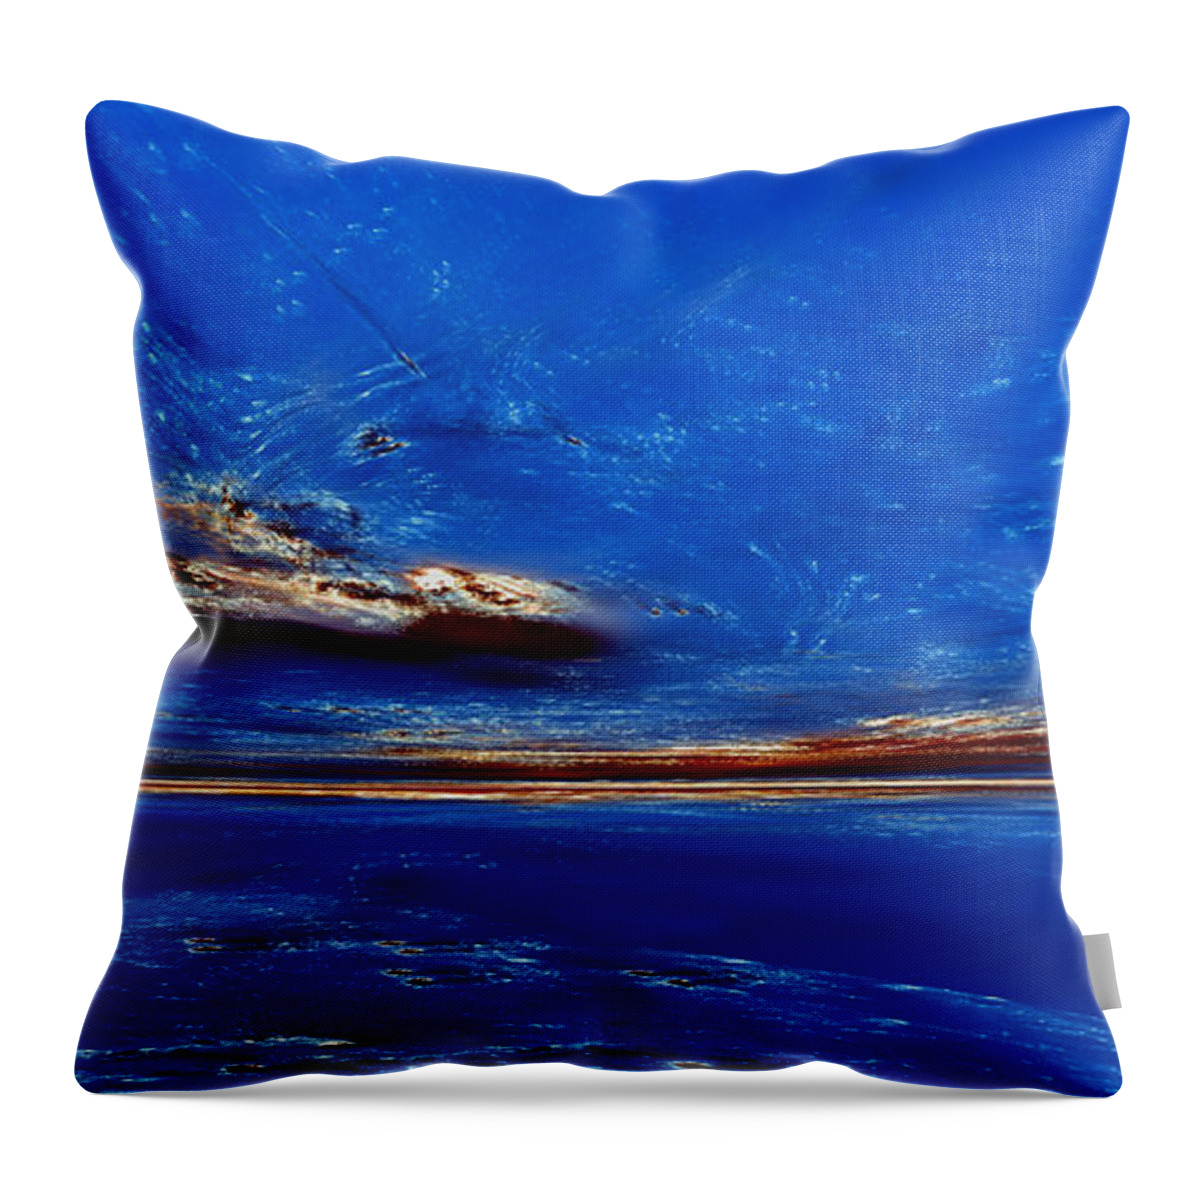  Throw Pillow featuring the digital art The Desolate Place II by Richard Ortolano